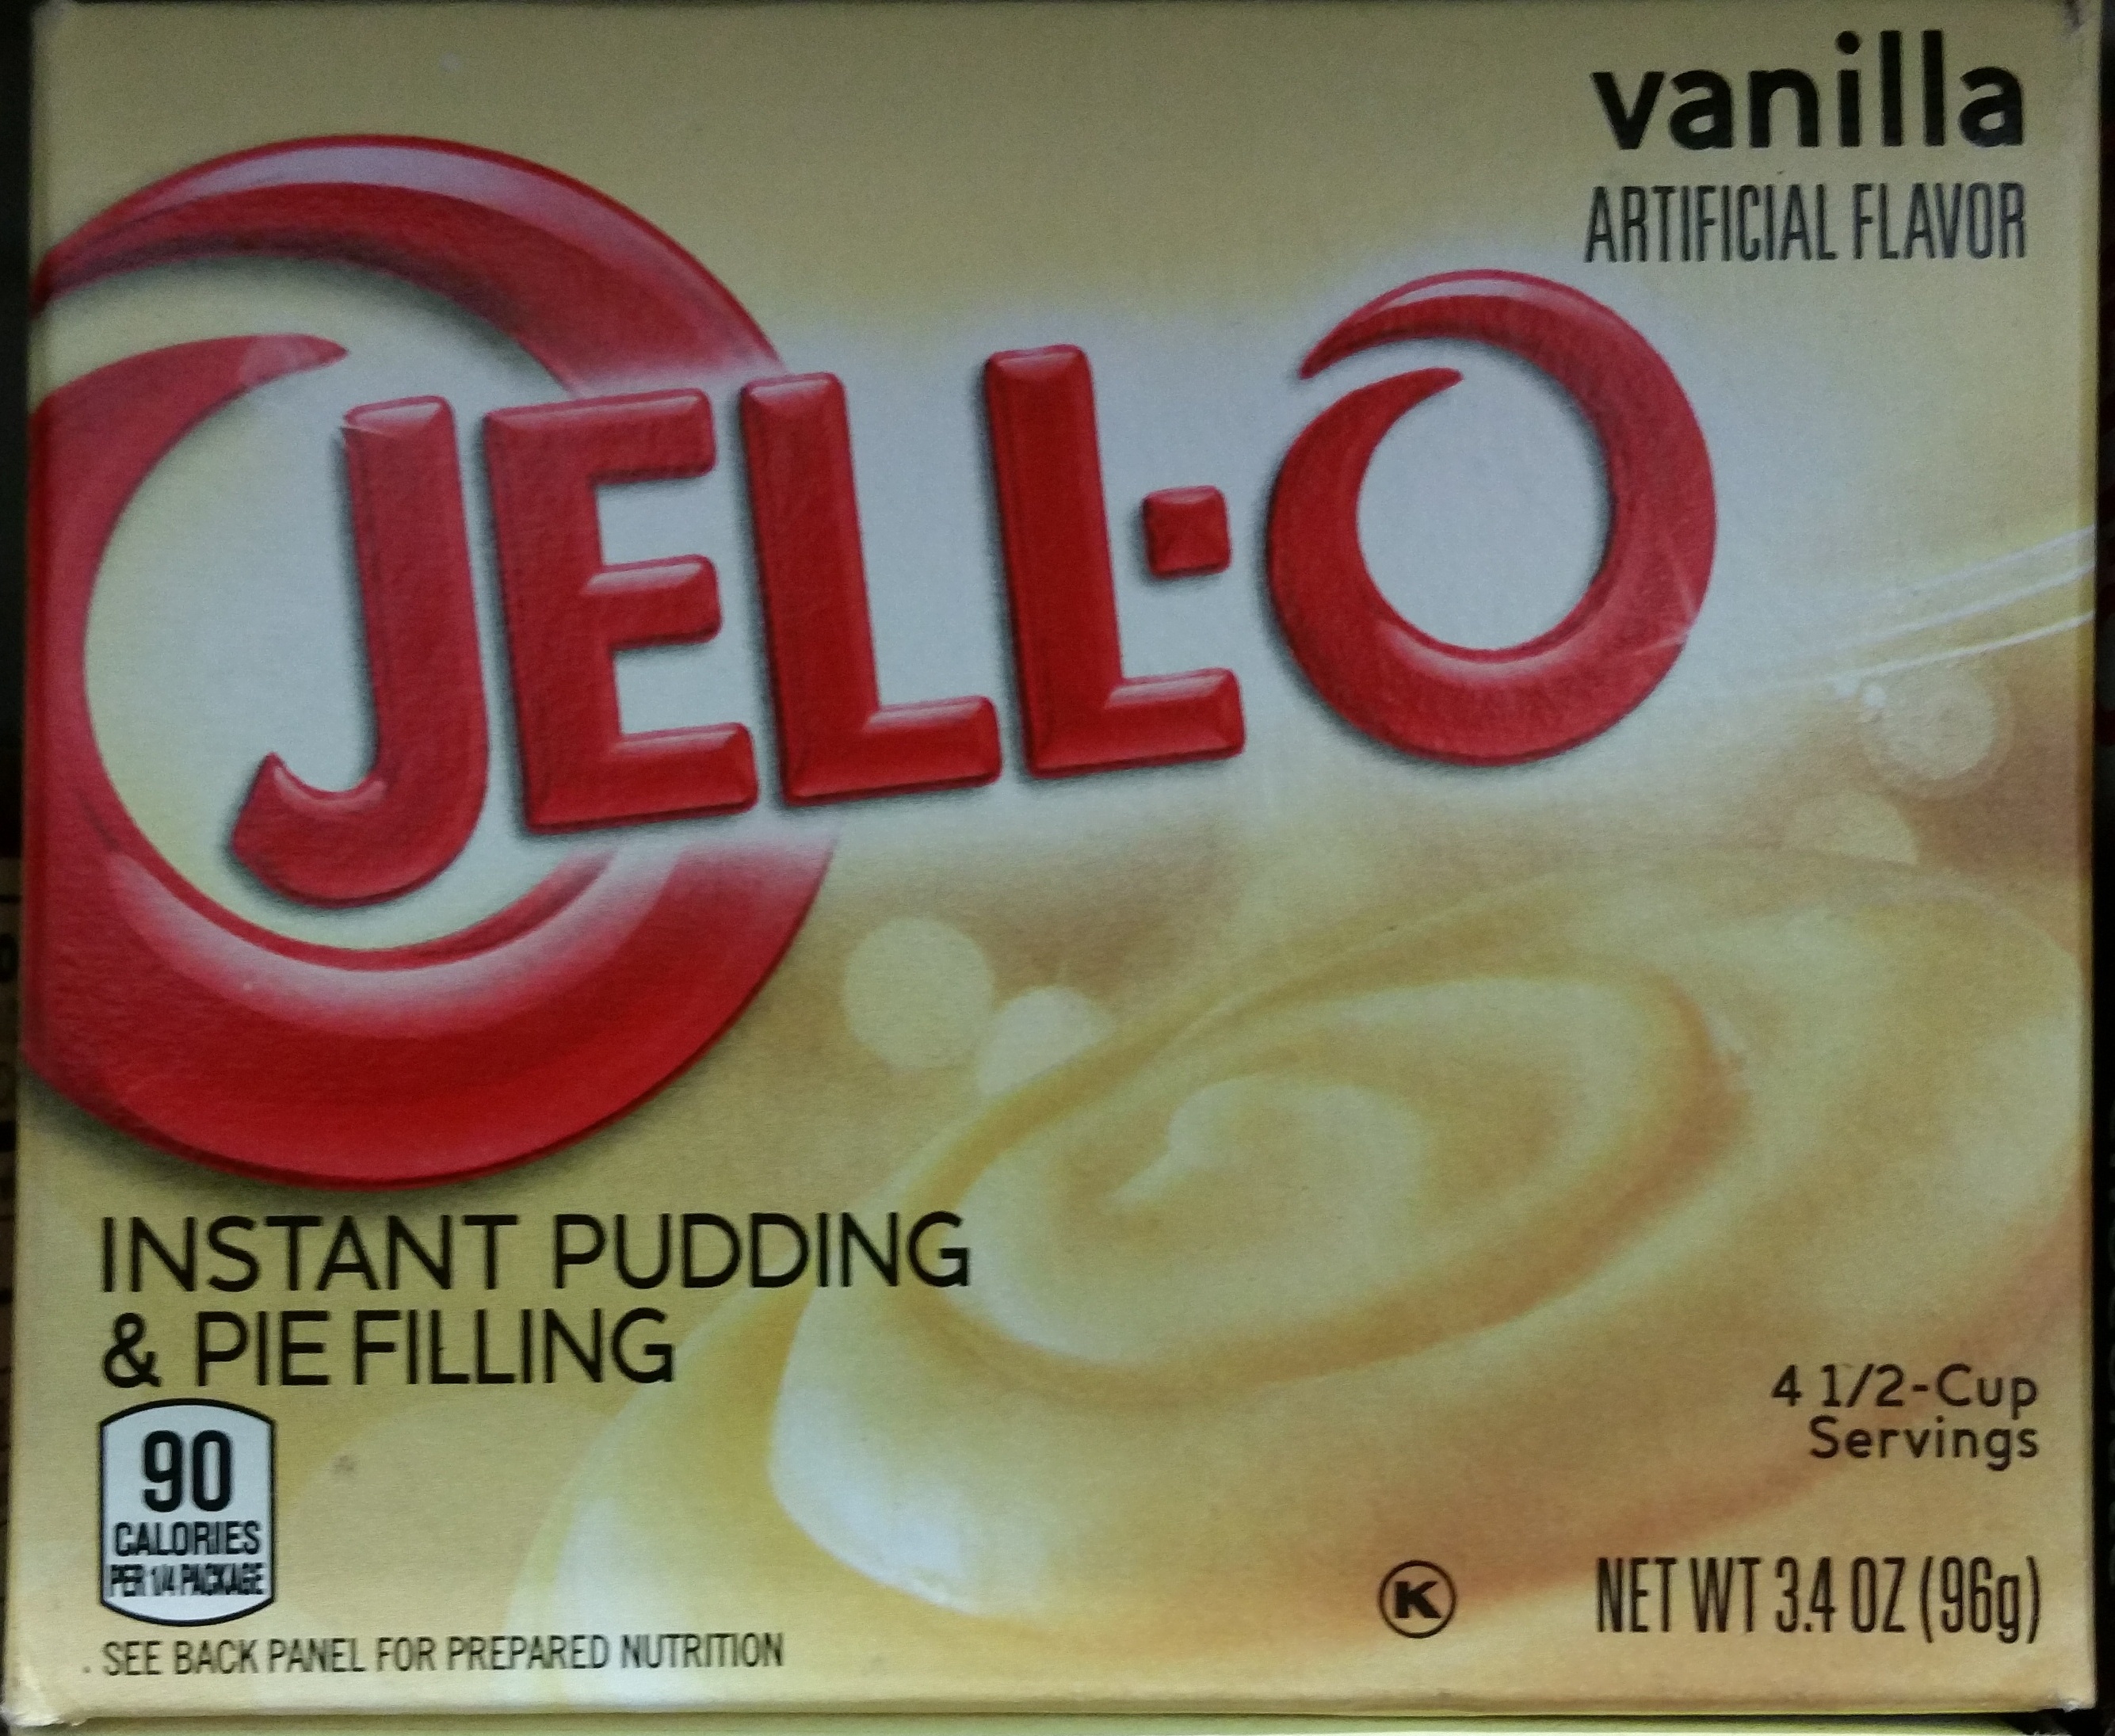 Jell-o vanille - Product